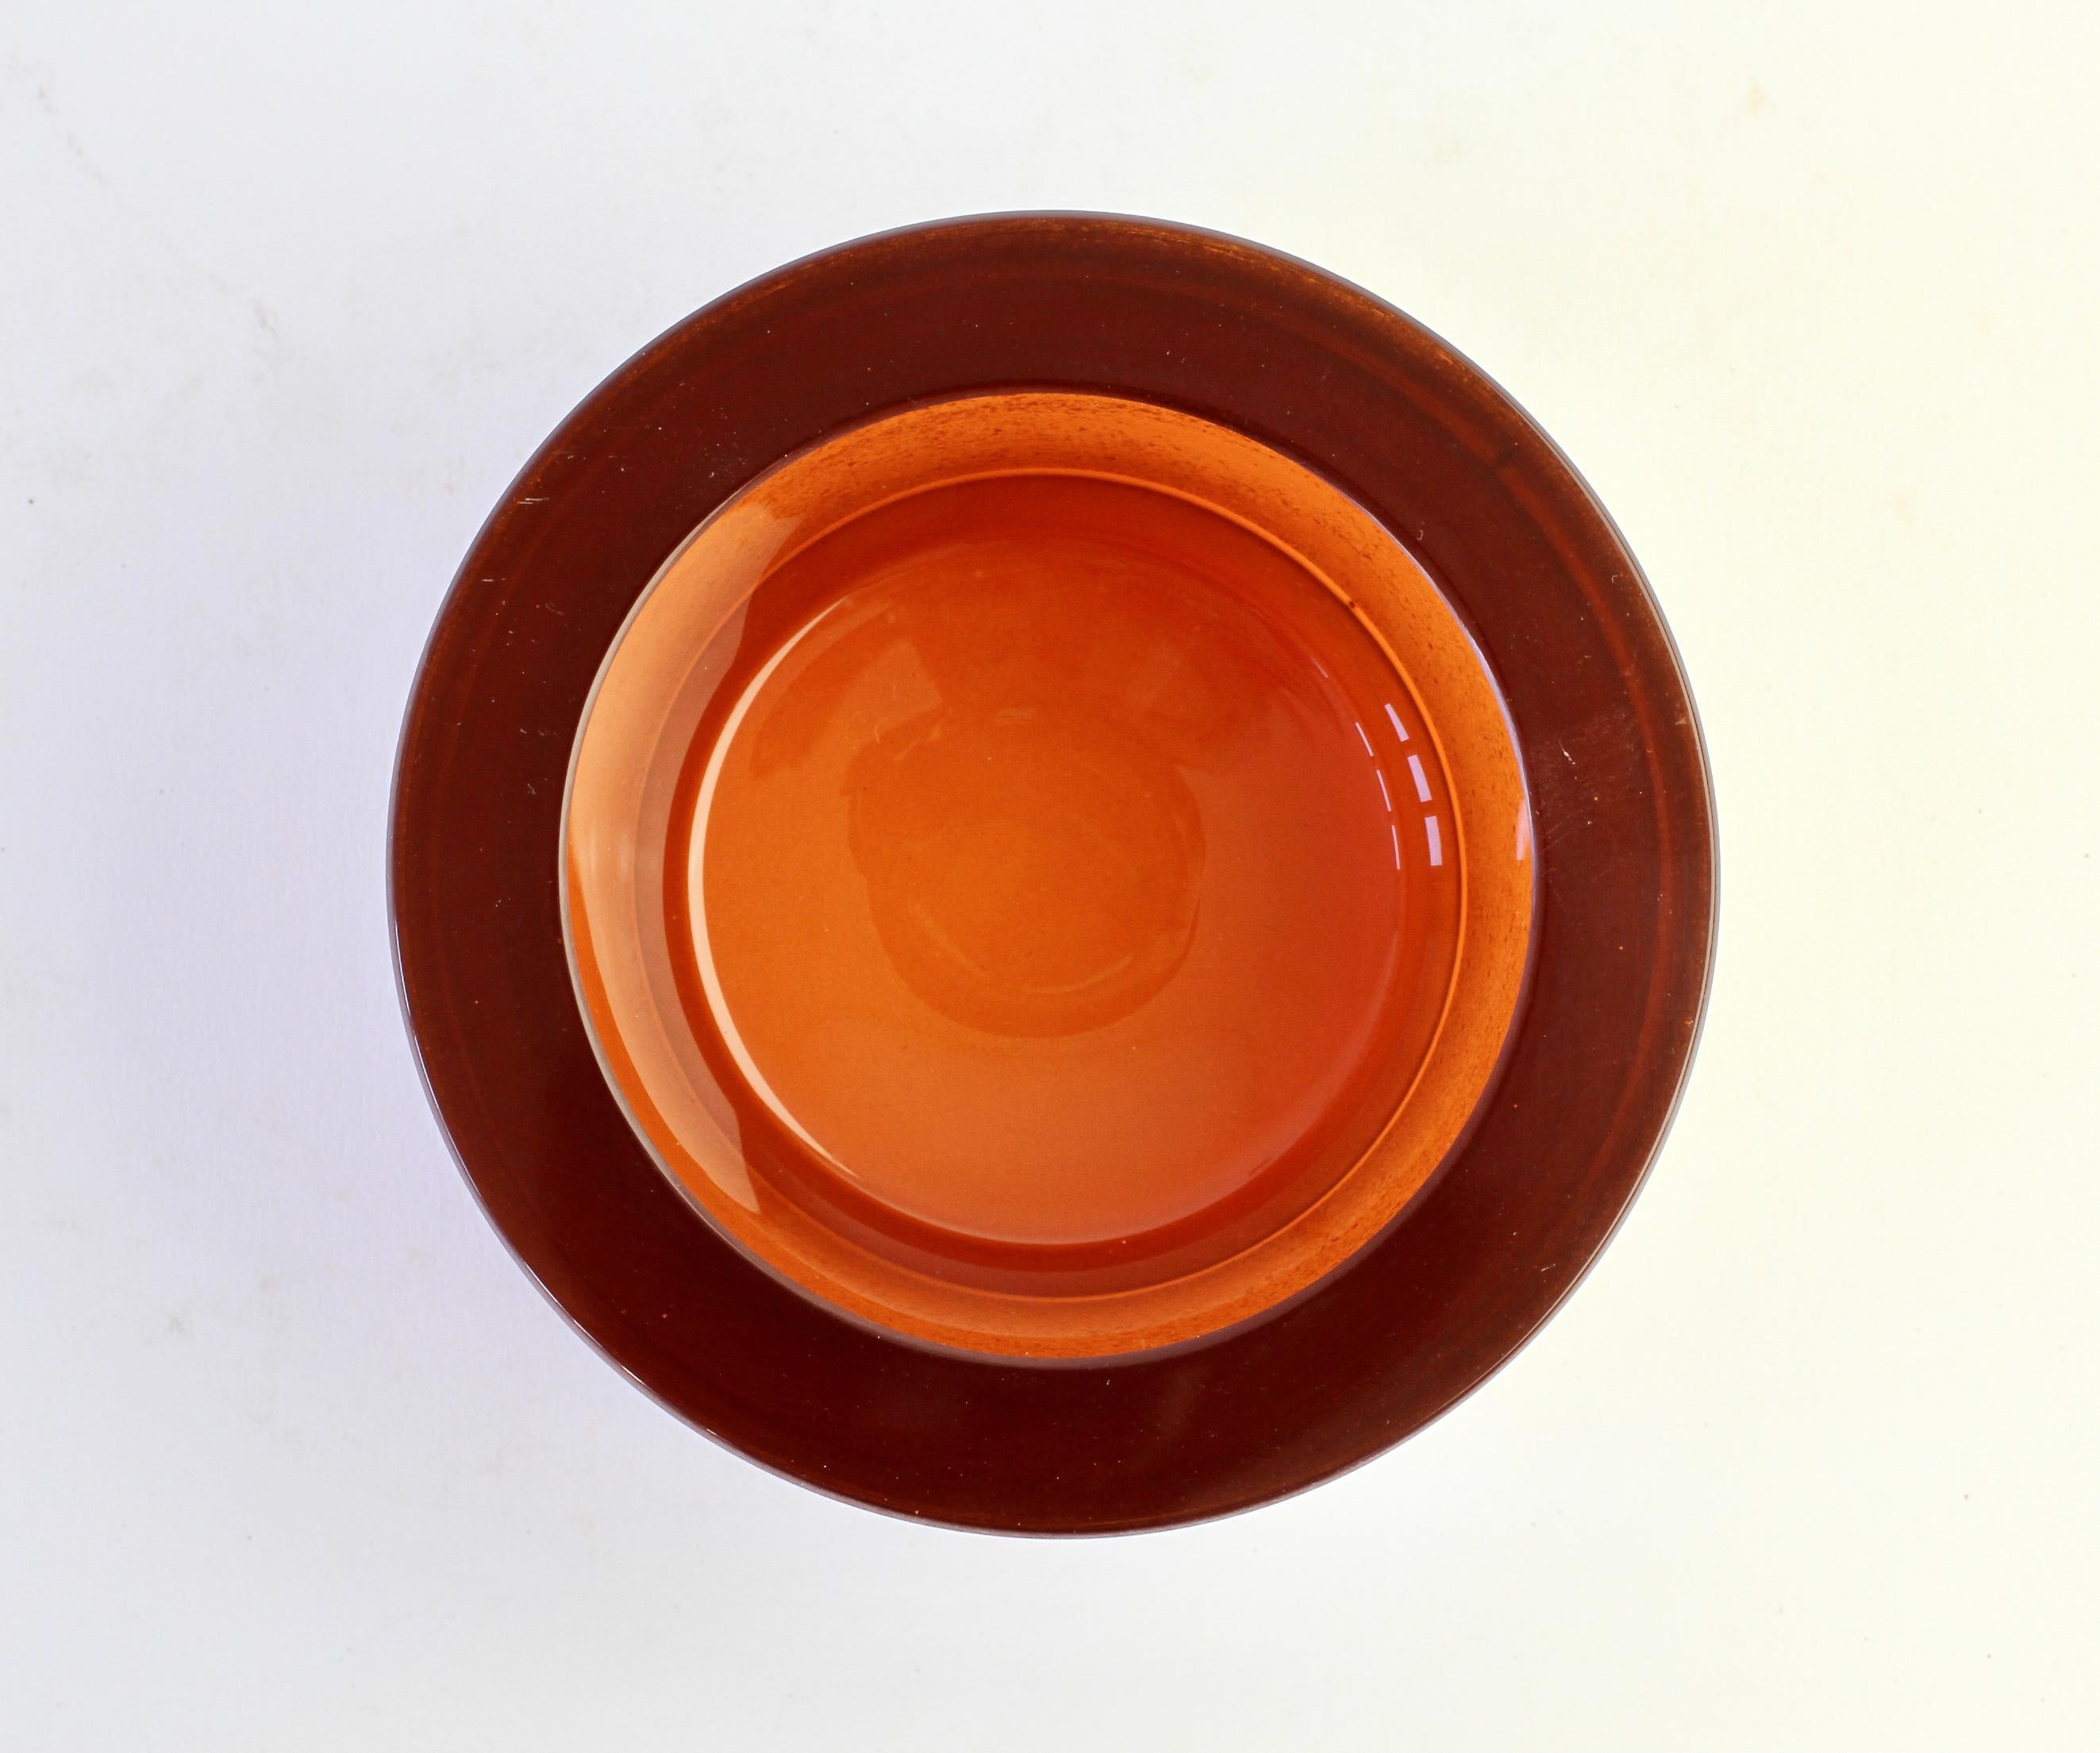 Stunning honey brown amber 'a Scavo' white colored / coloured round circular glass bowl, dish or ashtray by Seguso Vetri d'Arte Murano, Italy, circa 1980s. Elegant in form - rather minimalist but with the obvious sign of quality with the thick and